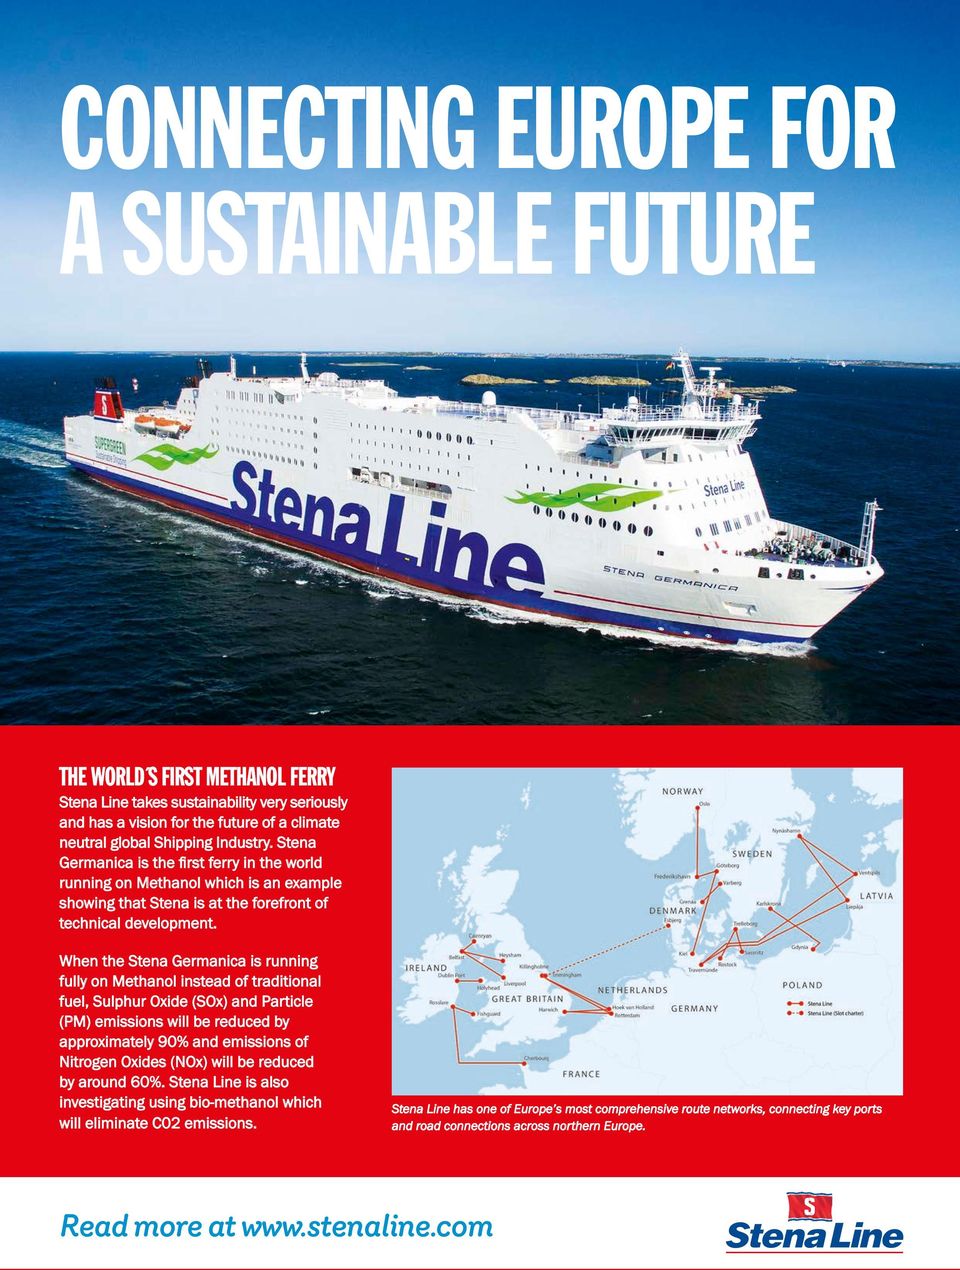 When the Stena Germanica is running fully on Methanol instead of traditional fuel, Sulphur Oxide (SOx) and Particle (PM) emissions will be reduced by approximately 90% and emissions of Nitrogen